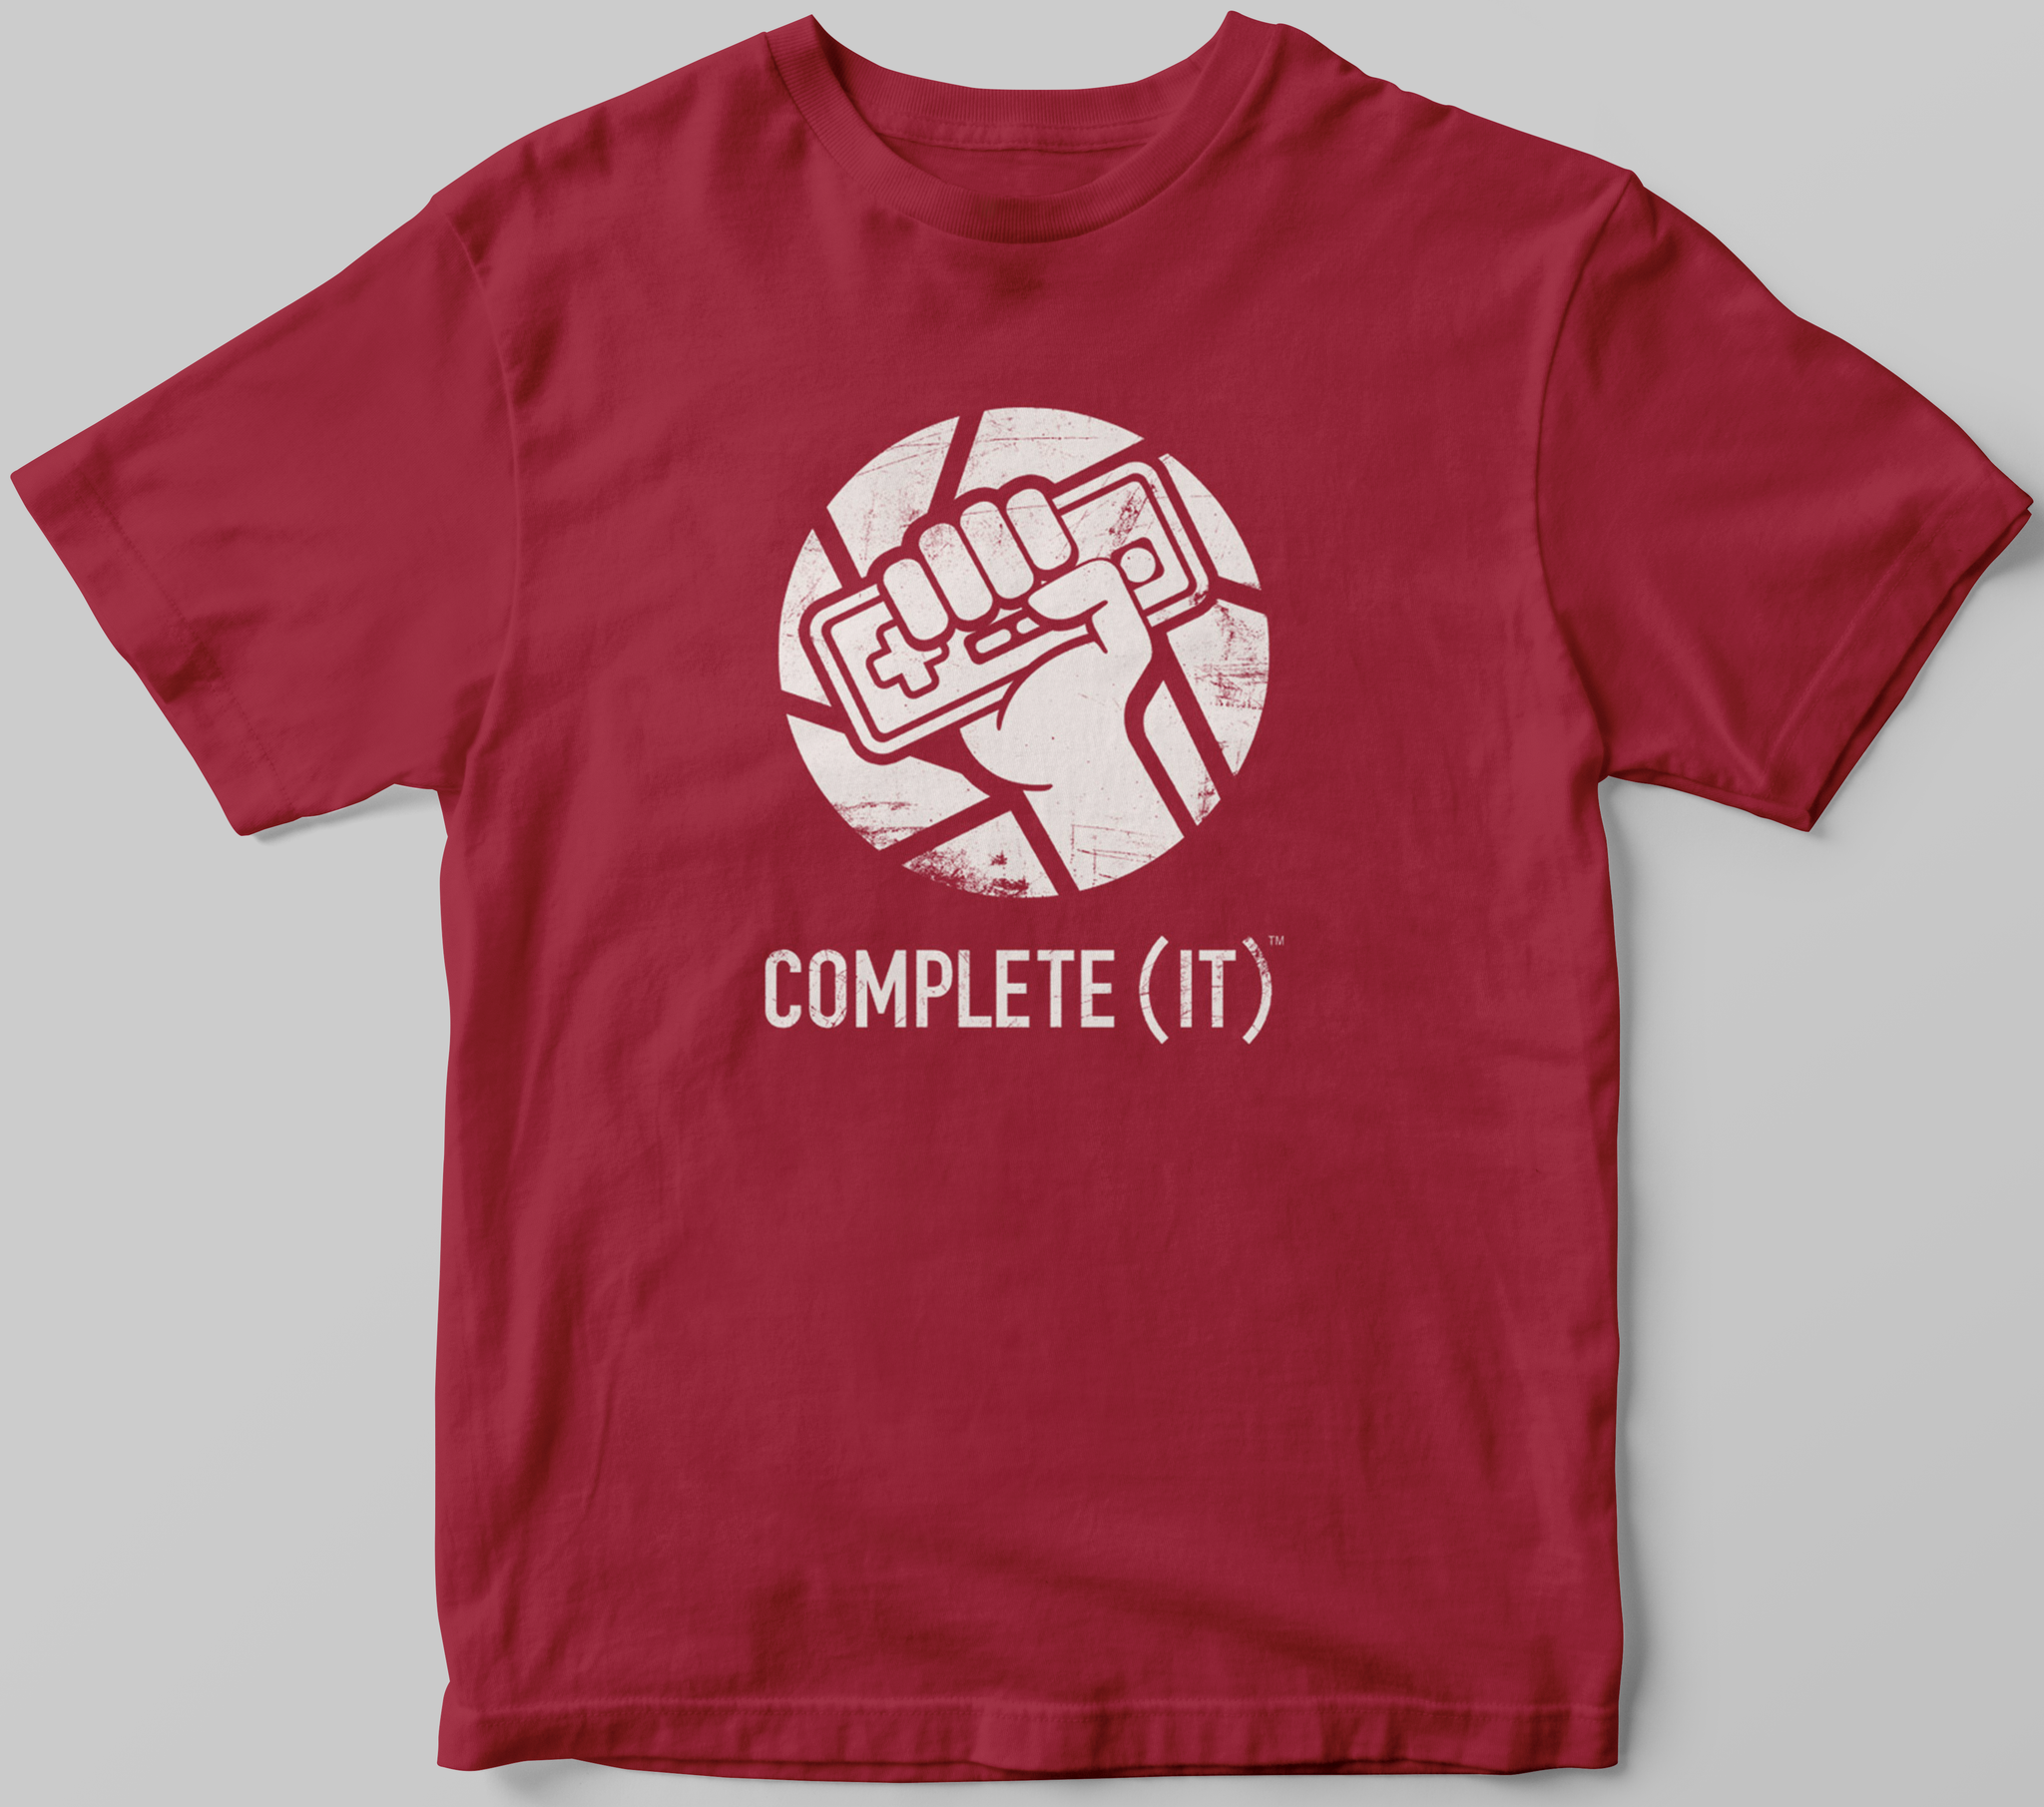 Be part of Comepletionist history with this old school Complete(It) logo tee! Once they're gone, they're gone!